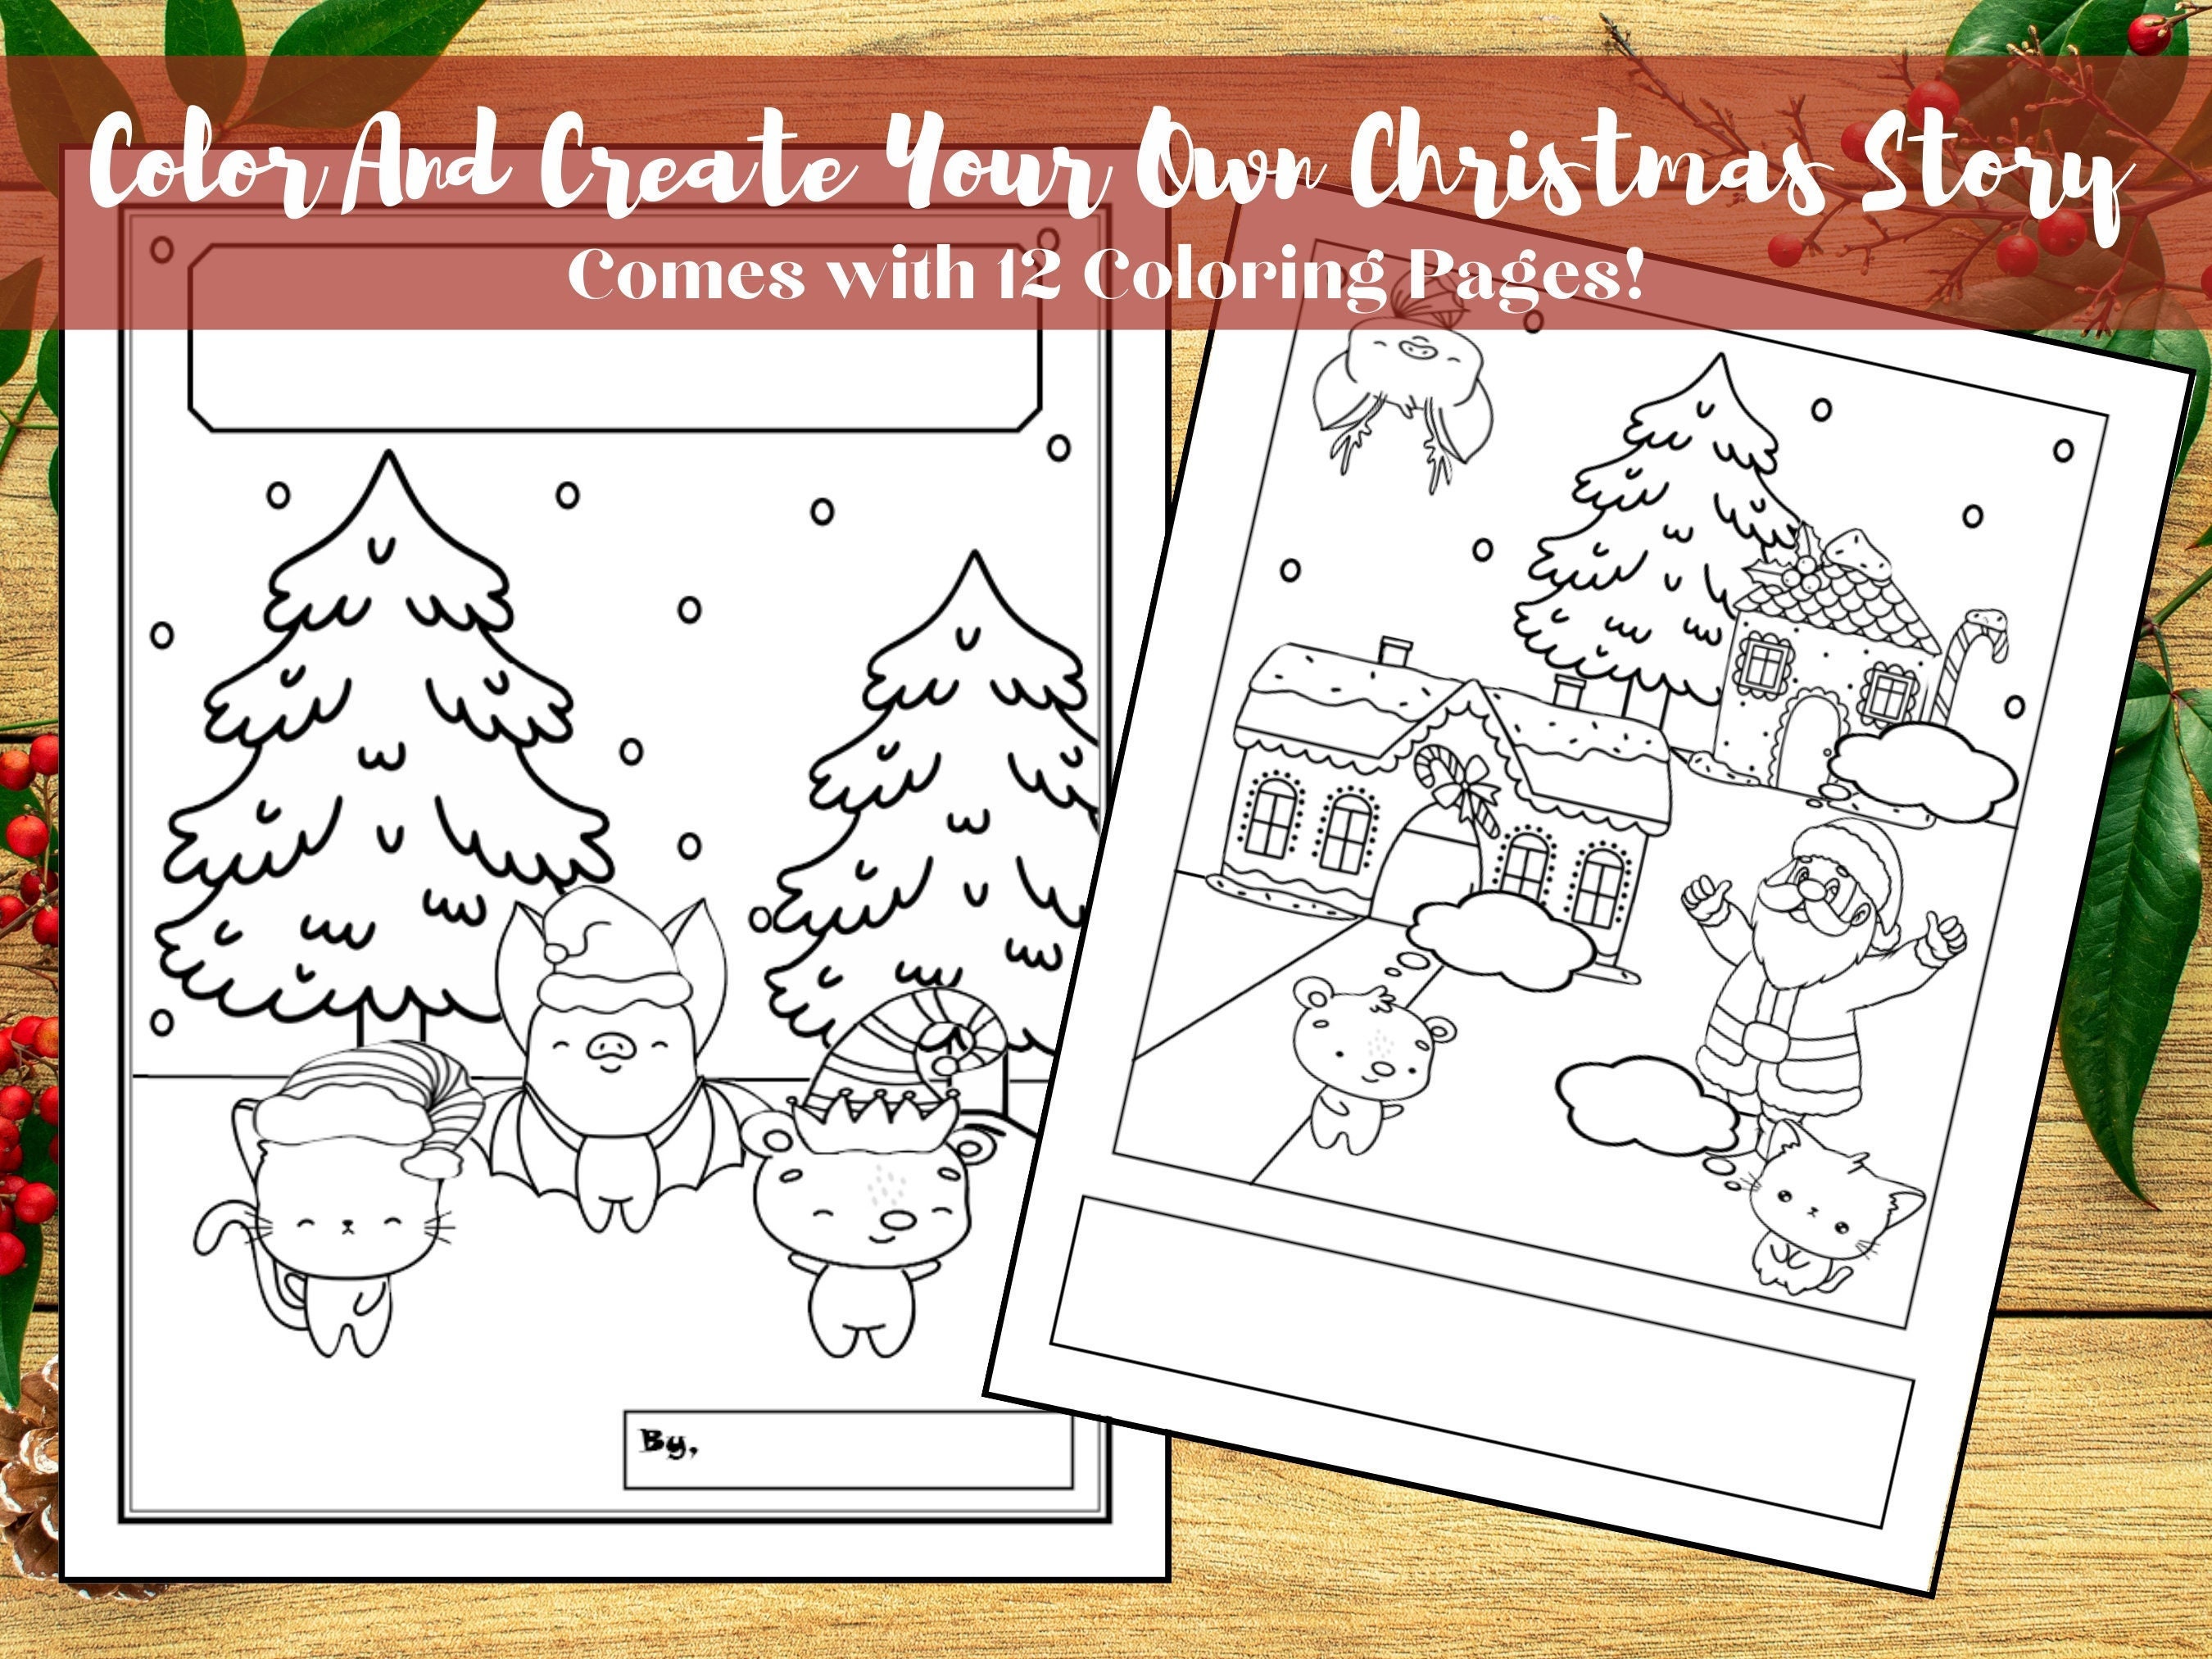 Personalized Christmas Coloring & Activity Books